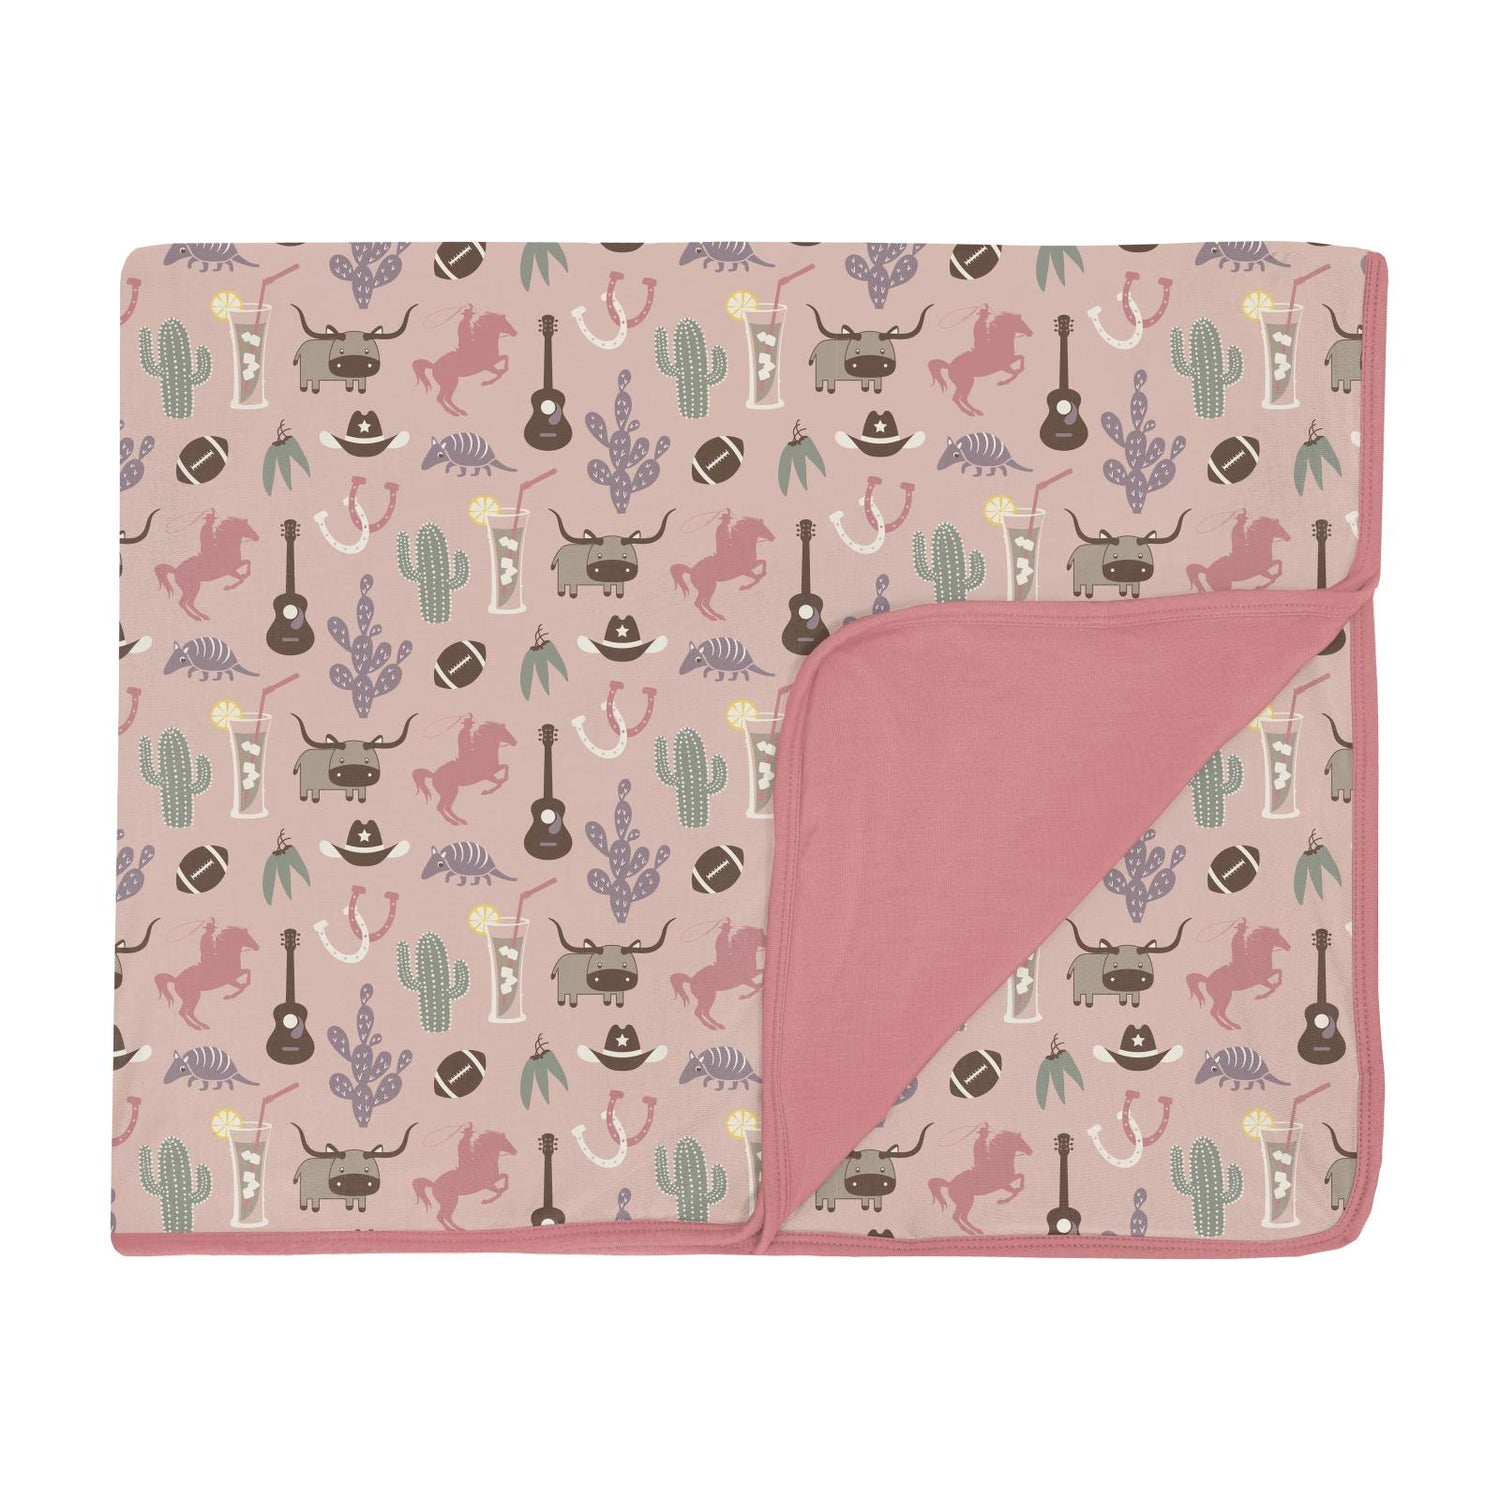 Print Toddler Blanket in Peach Blossom Rodeo